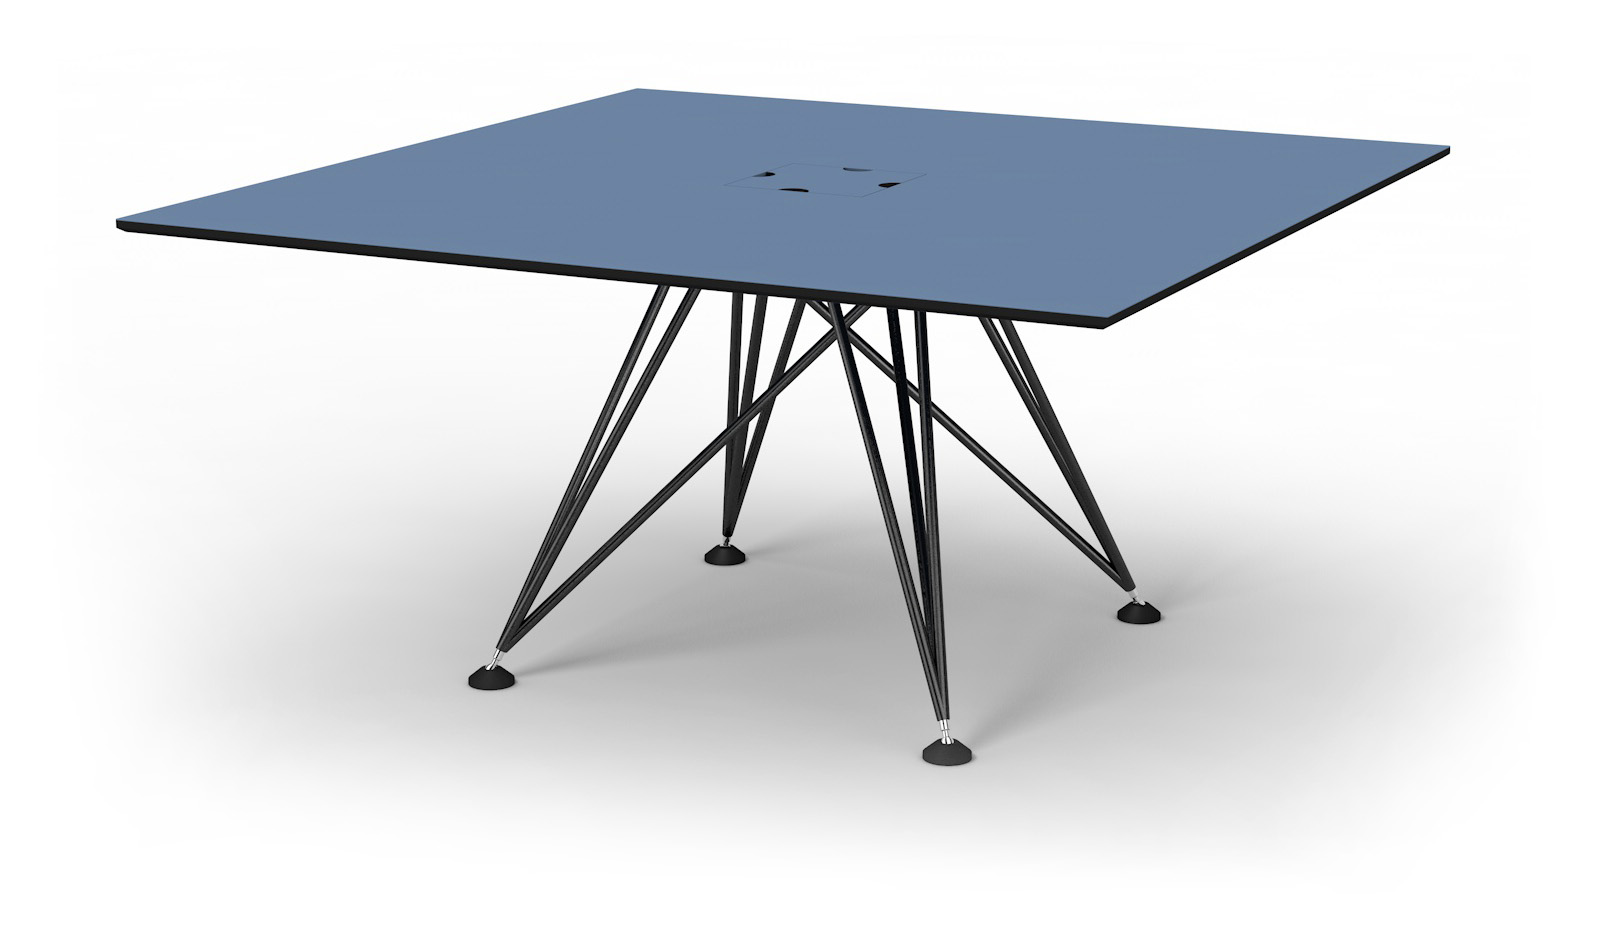 IONDESIGN TAKEOFF product design conference table system